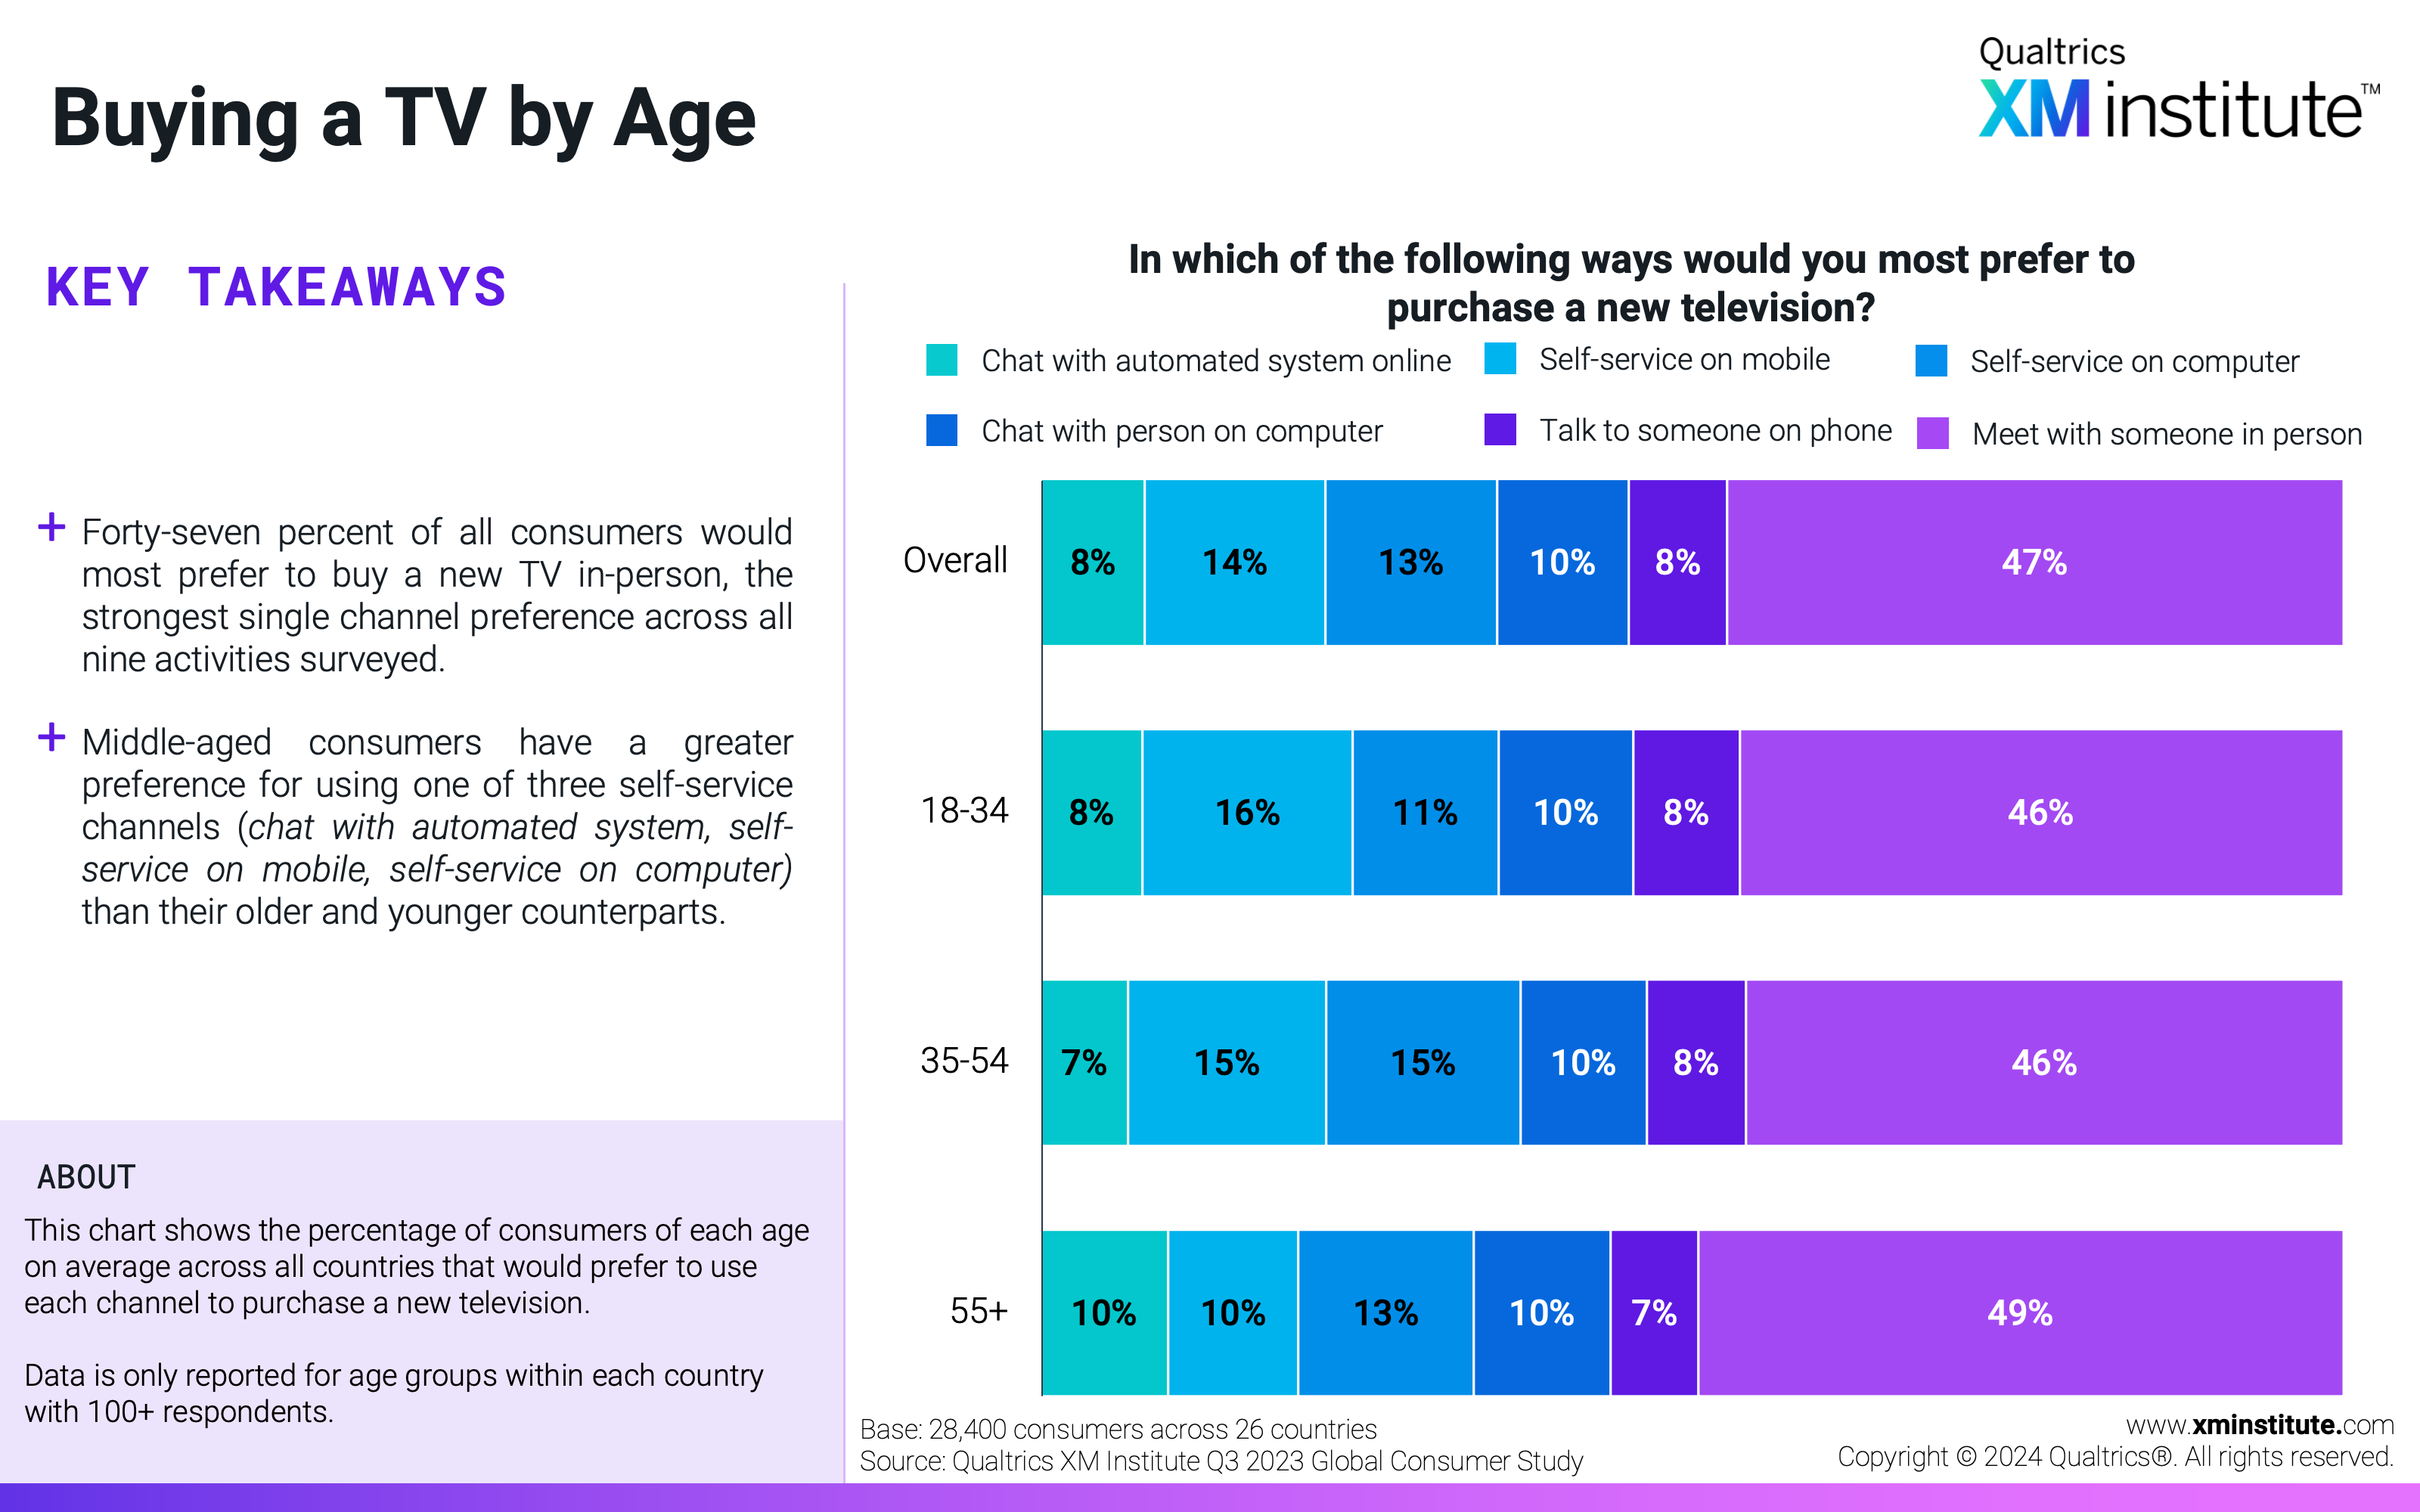 This chart shows the percentage of consumers of each age on average across all countries that would prefer to use each channel to purchase a new television. 